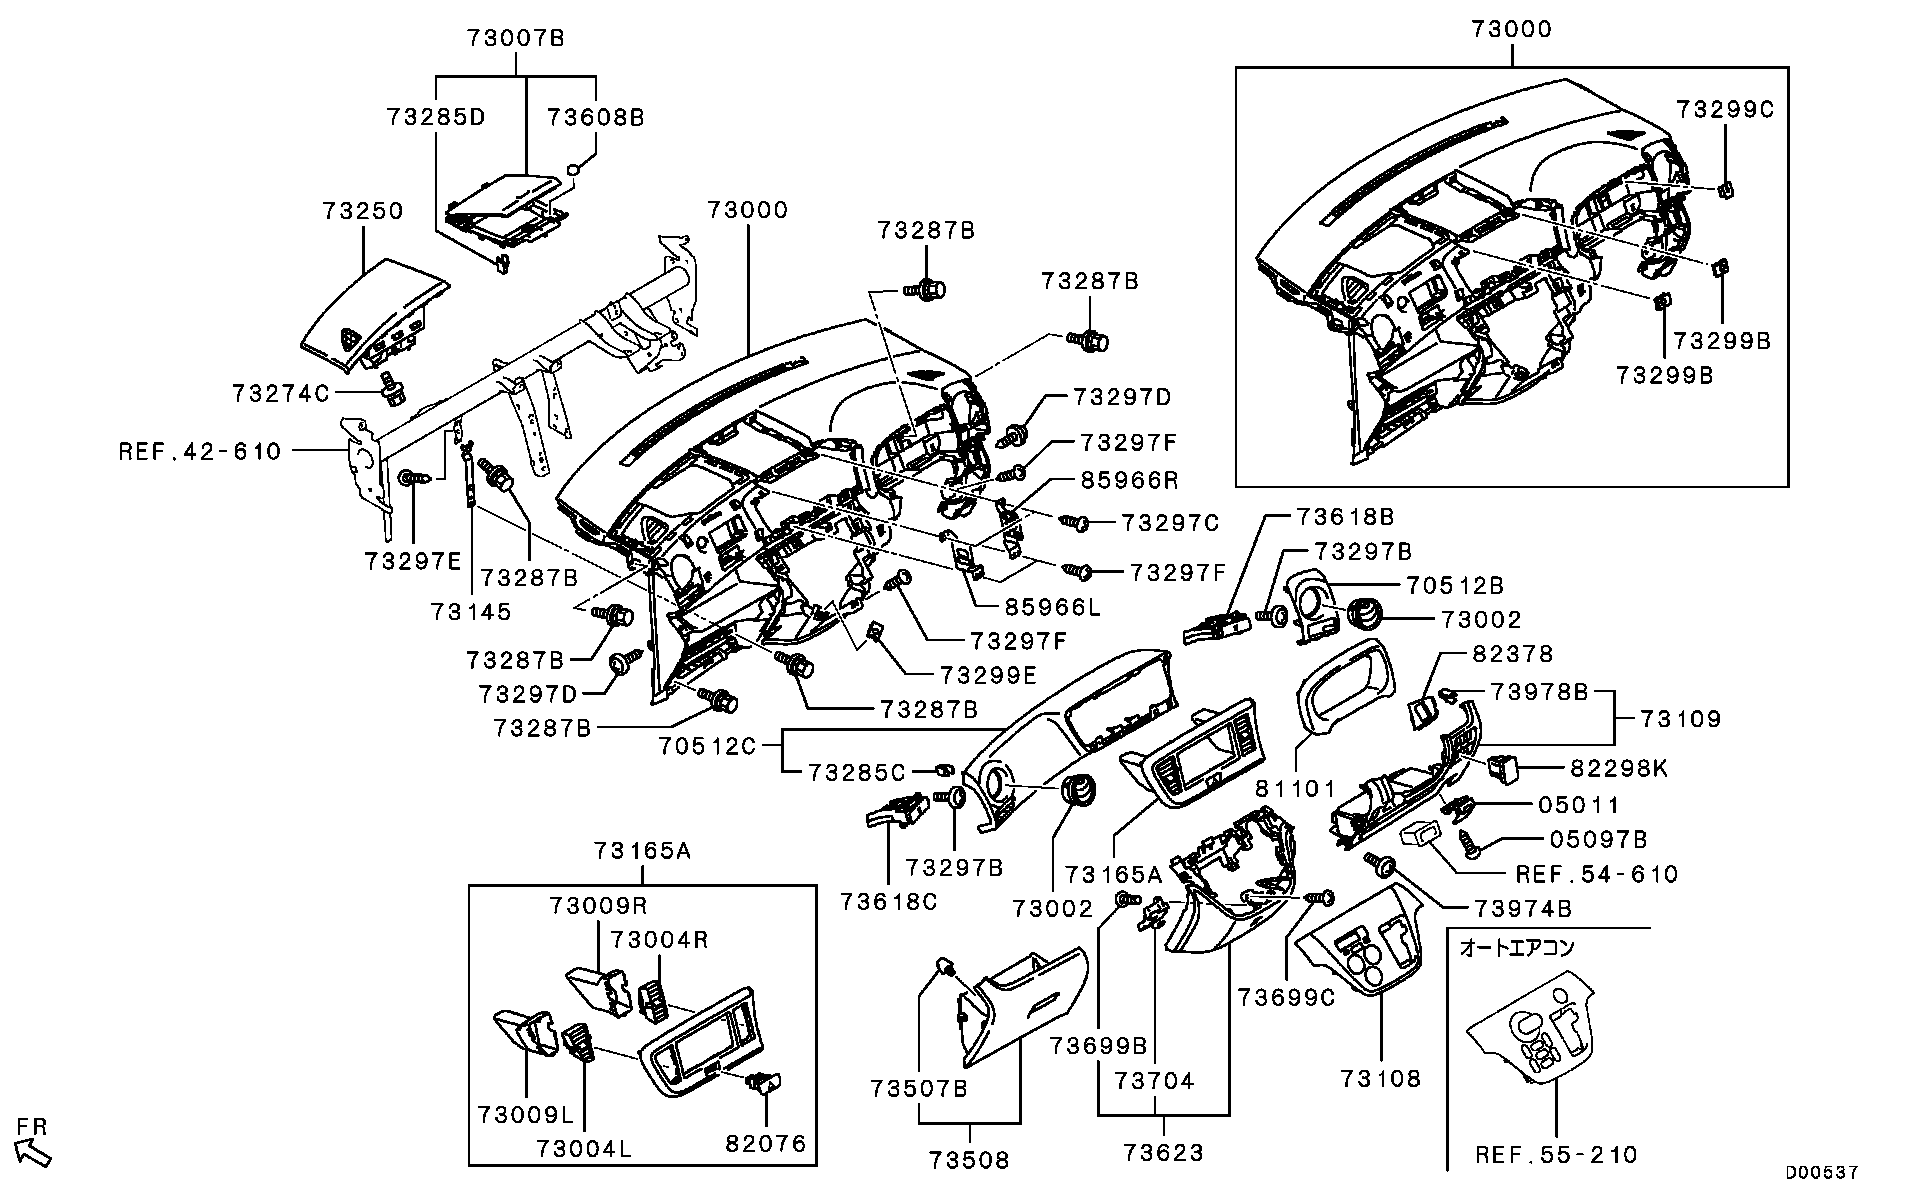 I/PANEL & RELATED PARTS